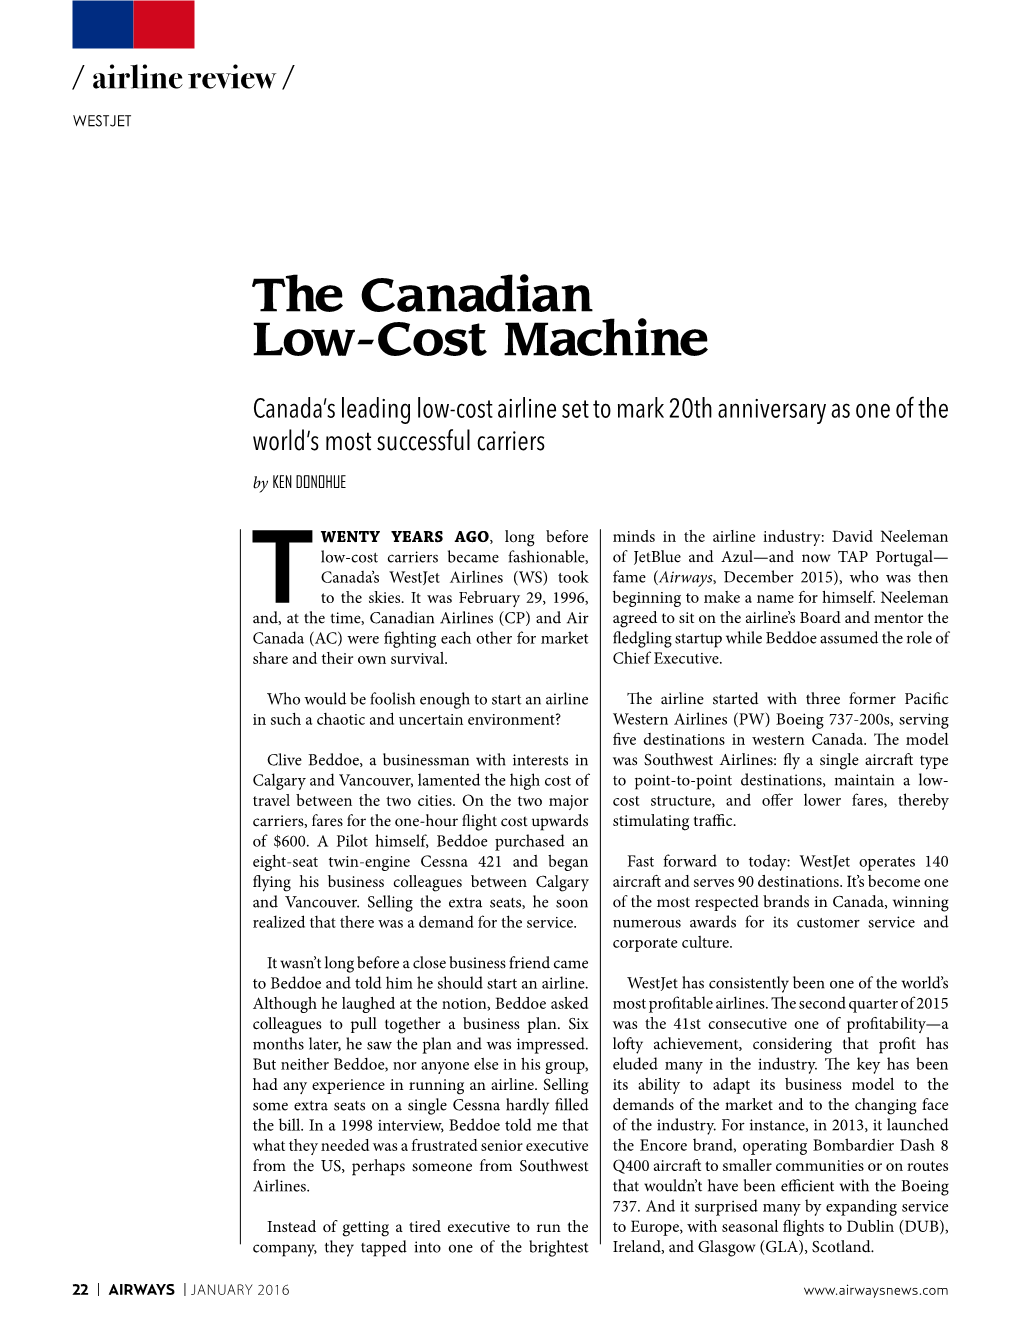 The Canadian Low-Cost Machine